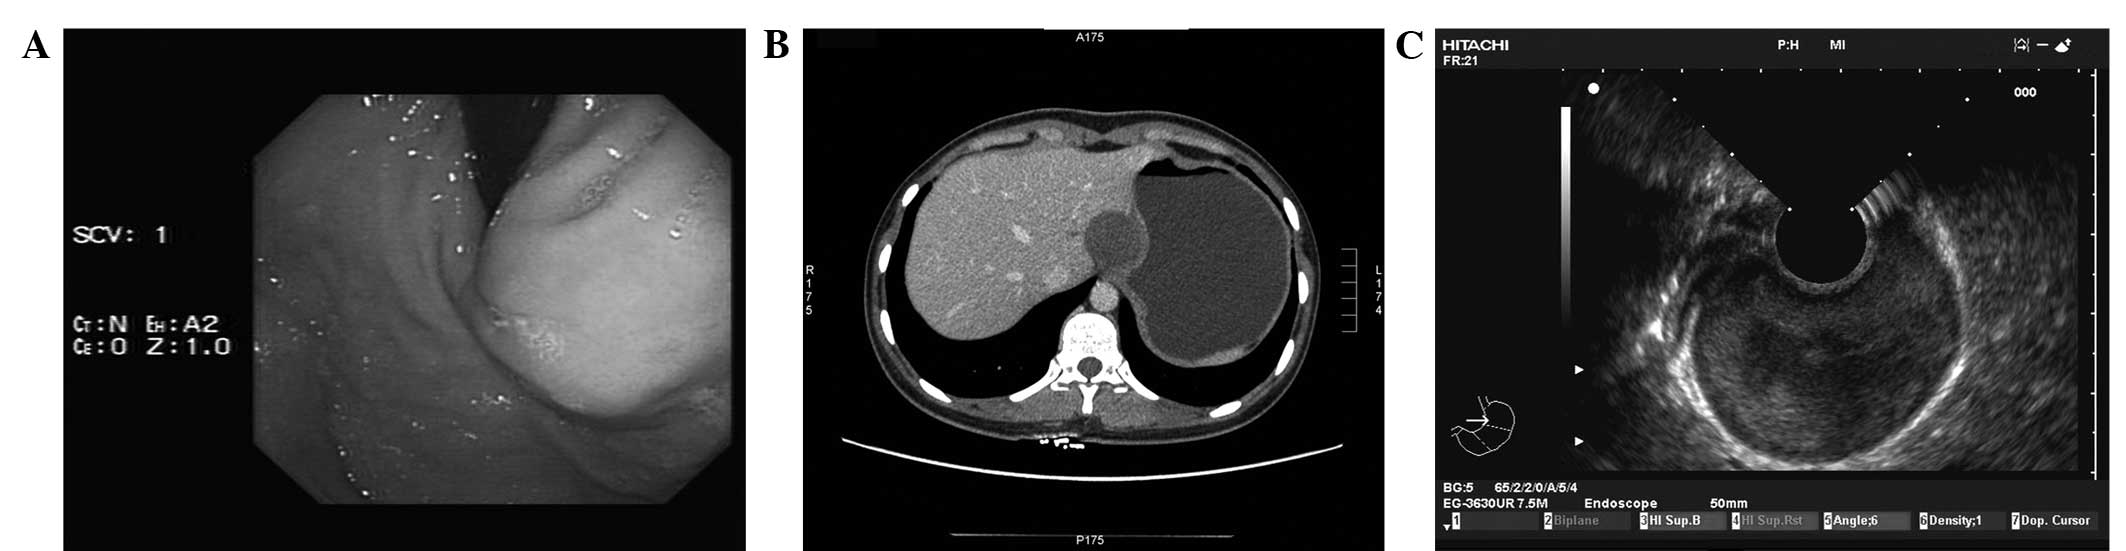 Giant Cystic Lymphangioma Originating From The Cardia Of The